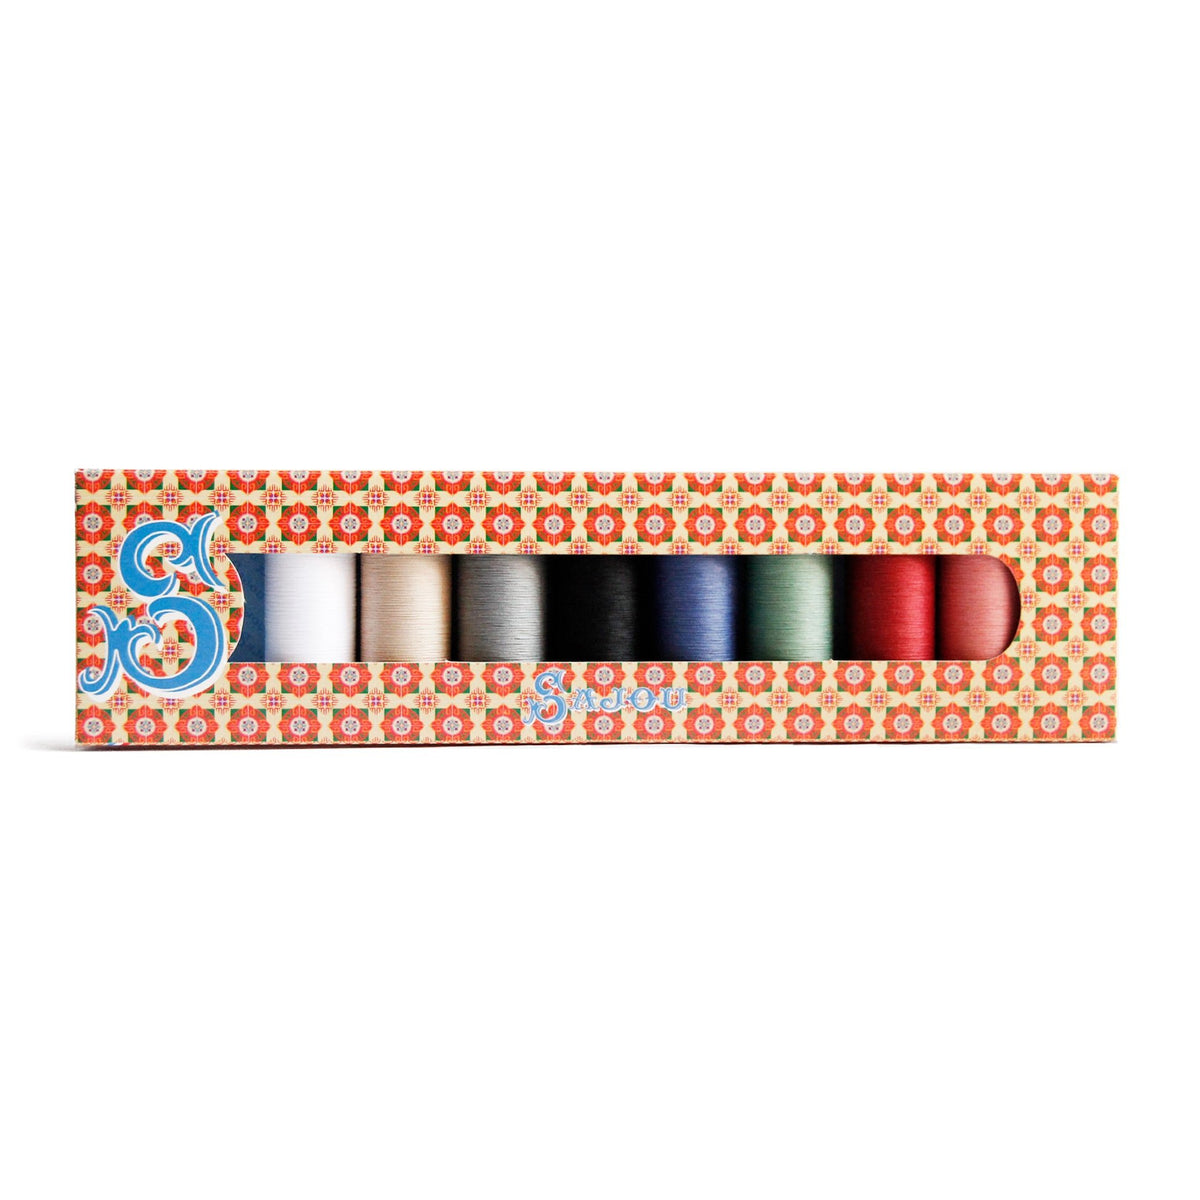 Patchwork Thread Gift Box, 8 spools    at Boston General Store